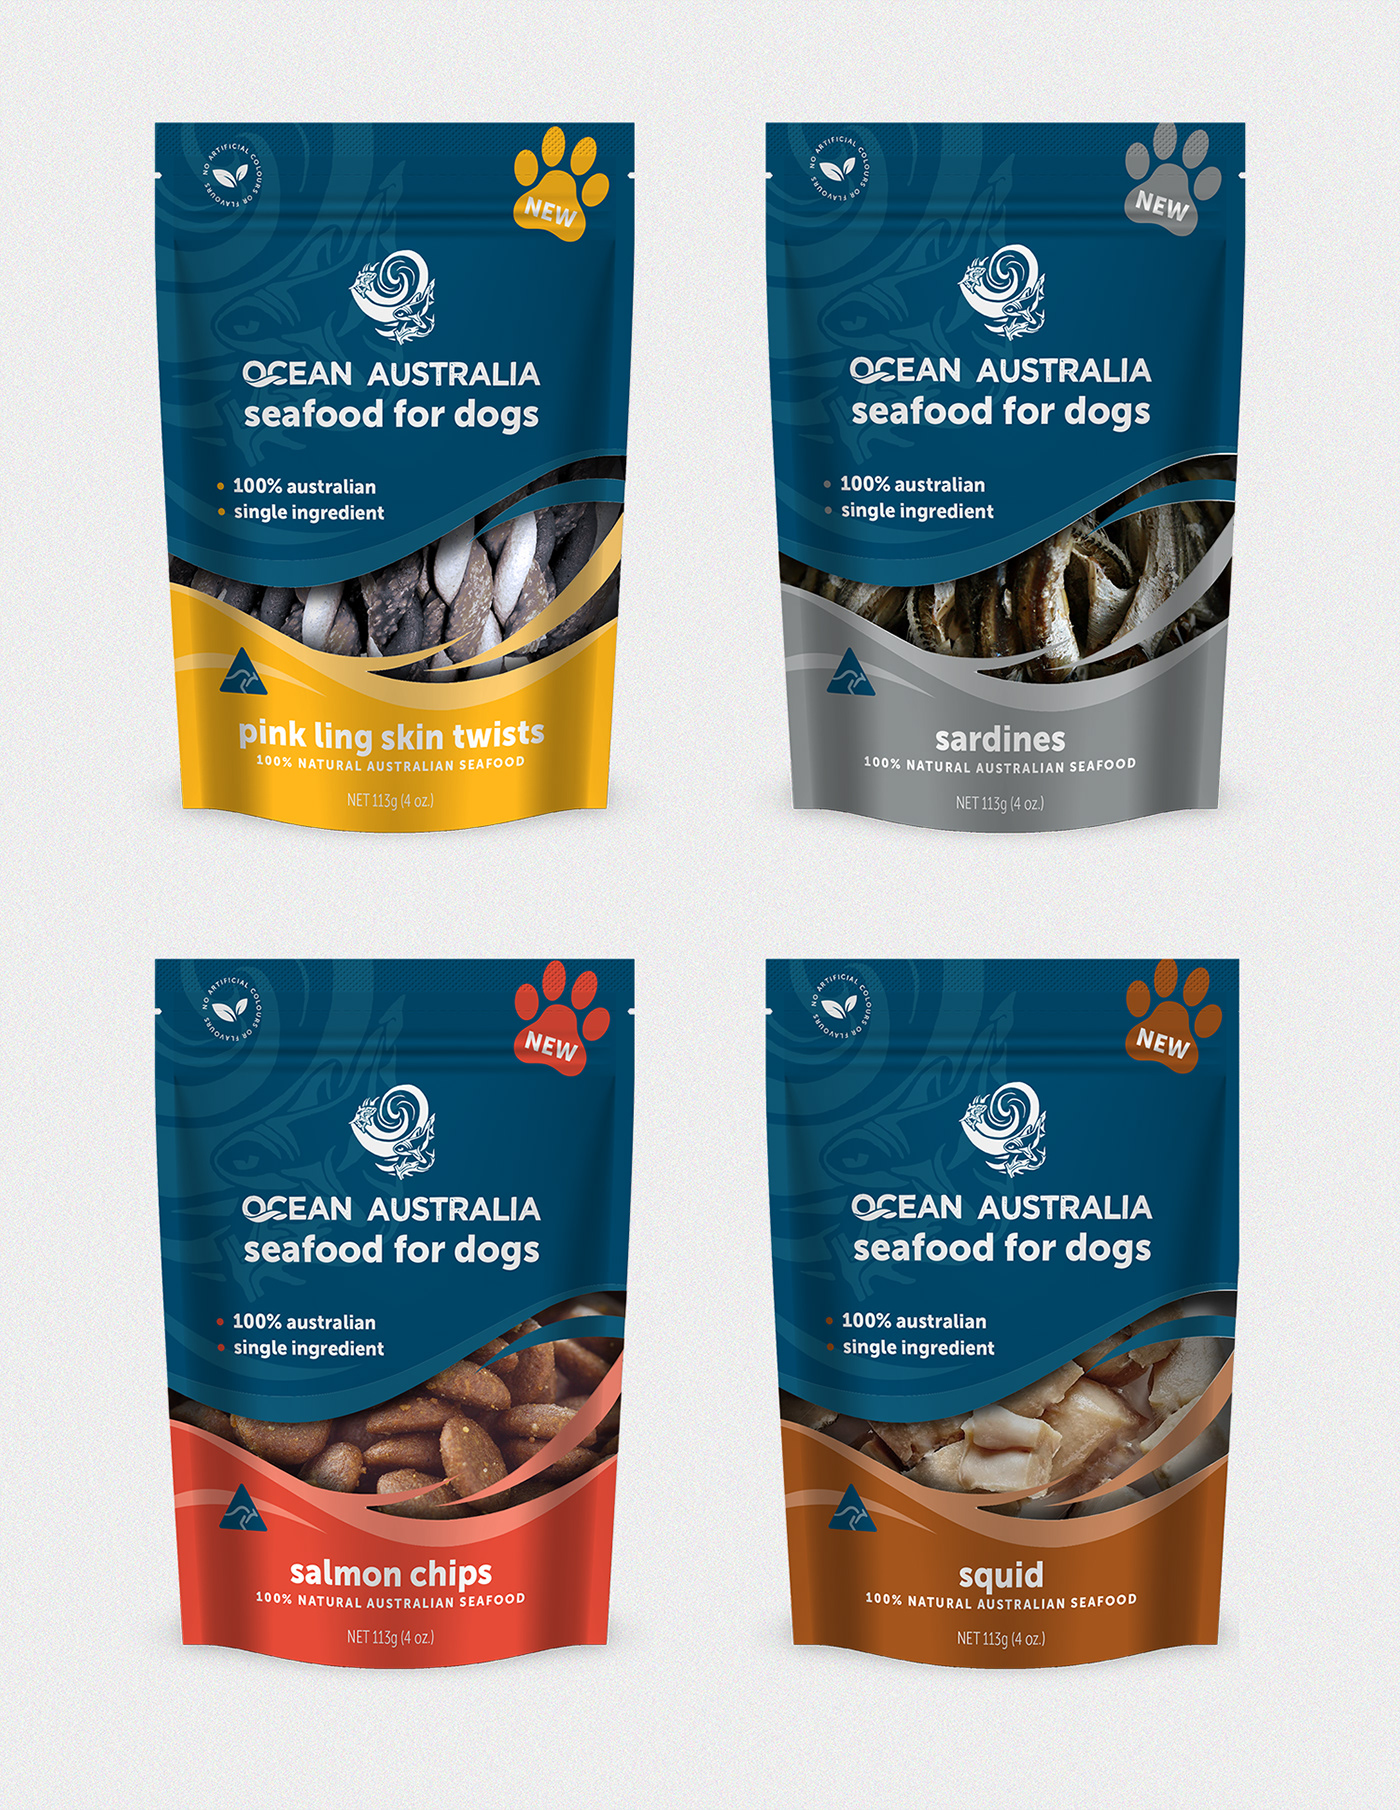 dog food pet food Pet Treats pouch packaging design Melbourne Melbourne Design Packaging bag design Seafood Packaging